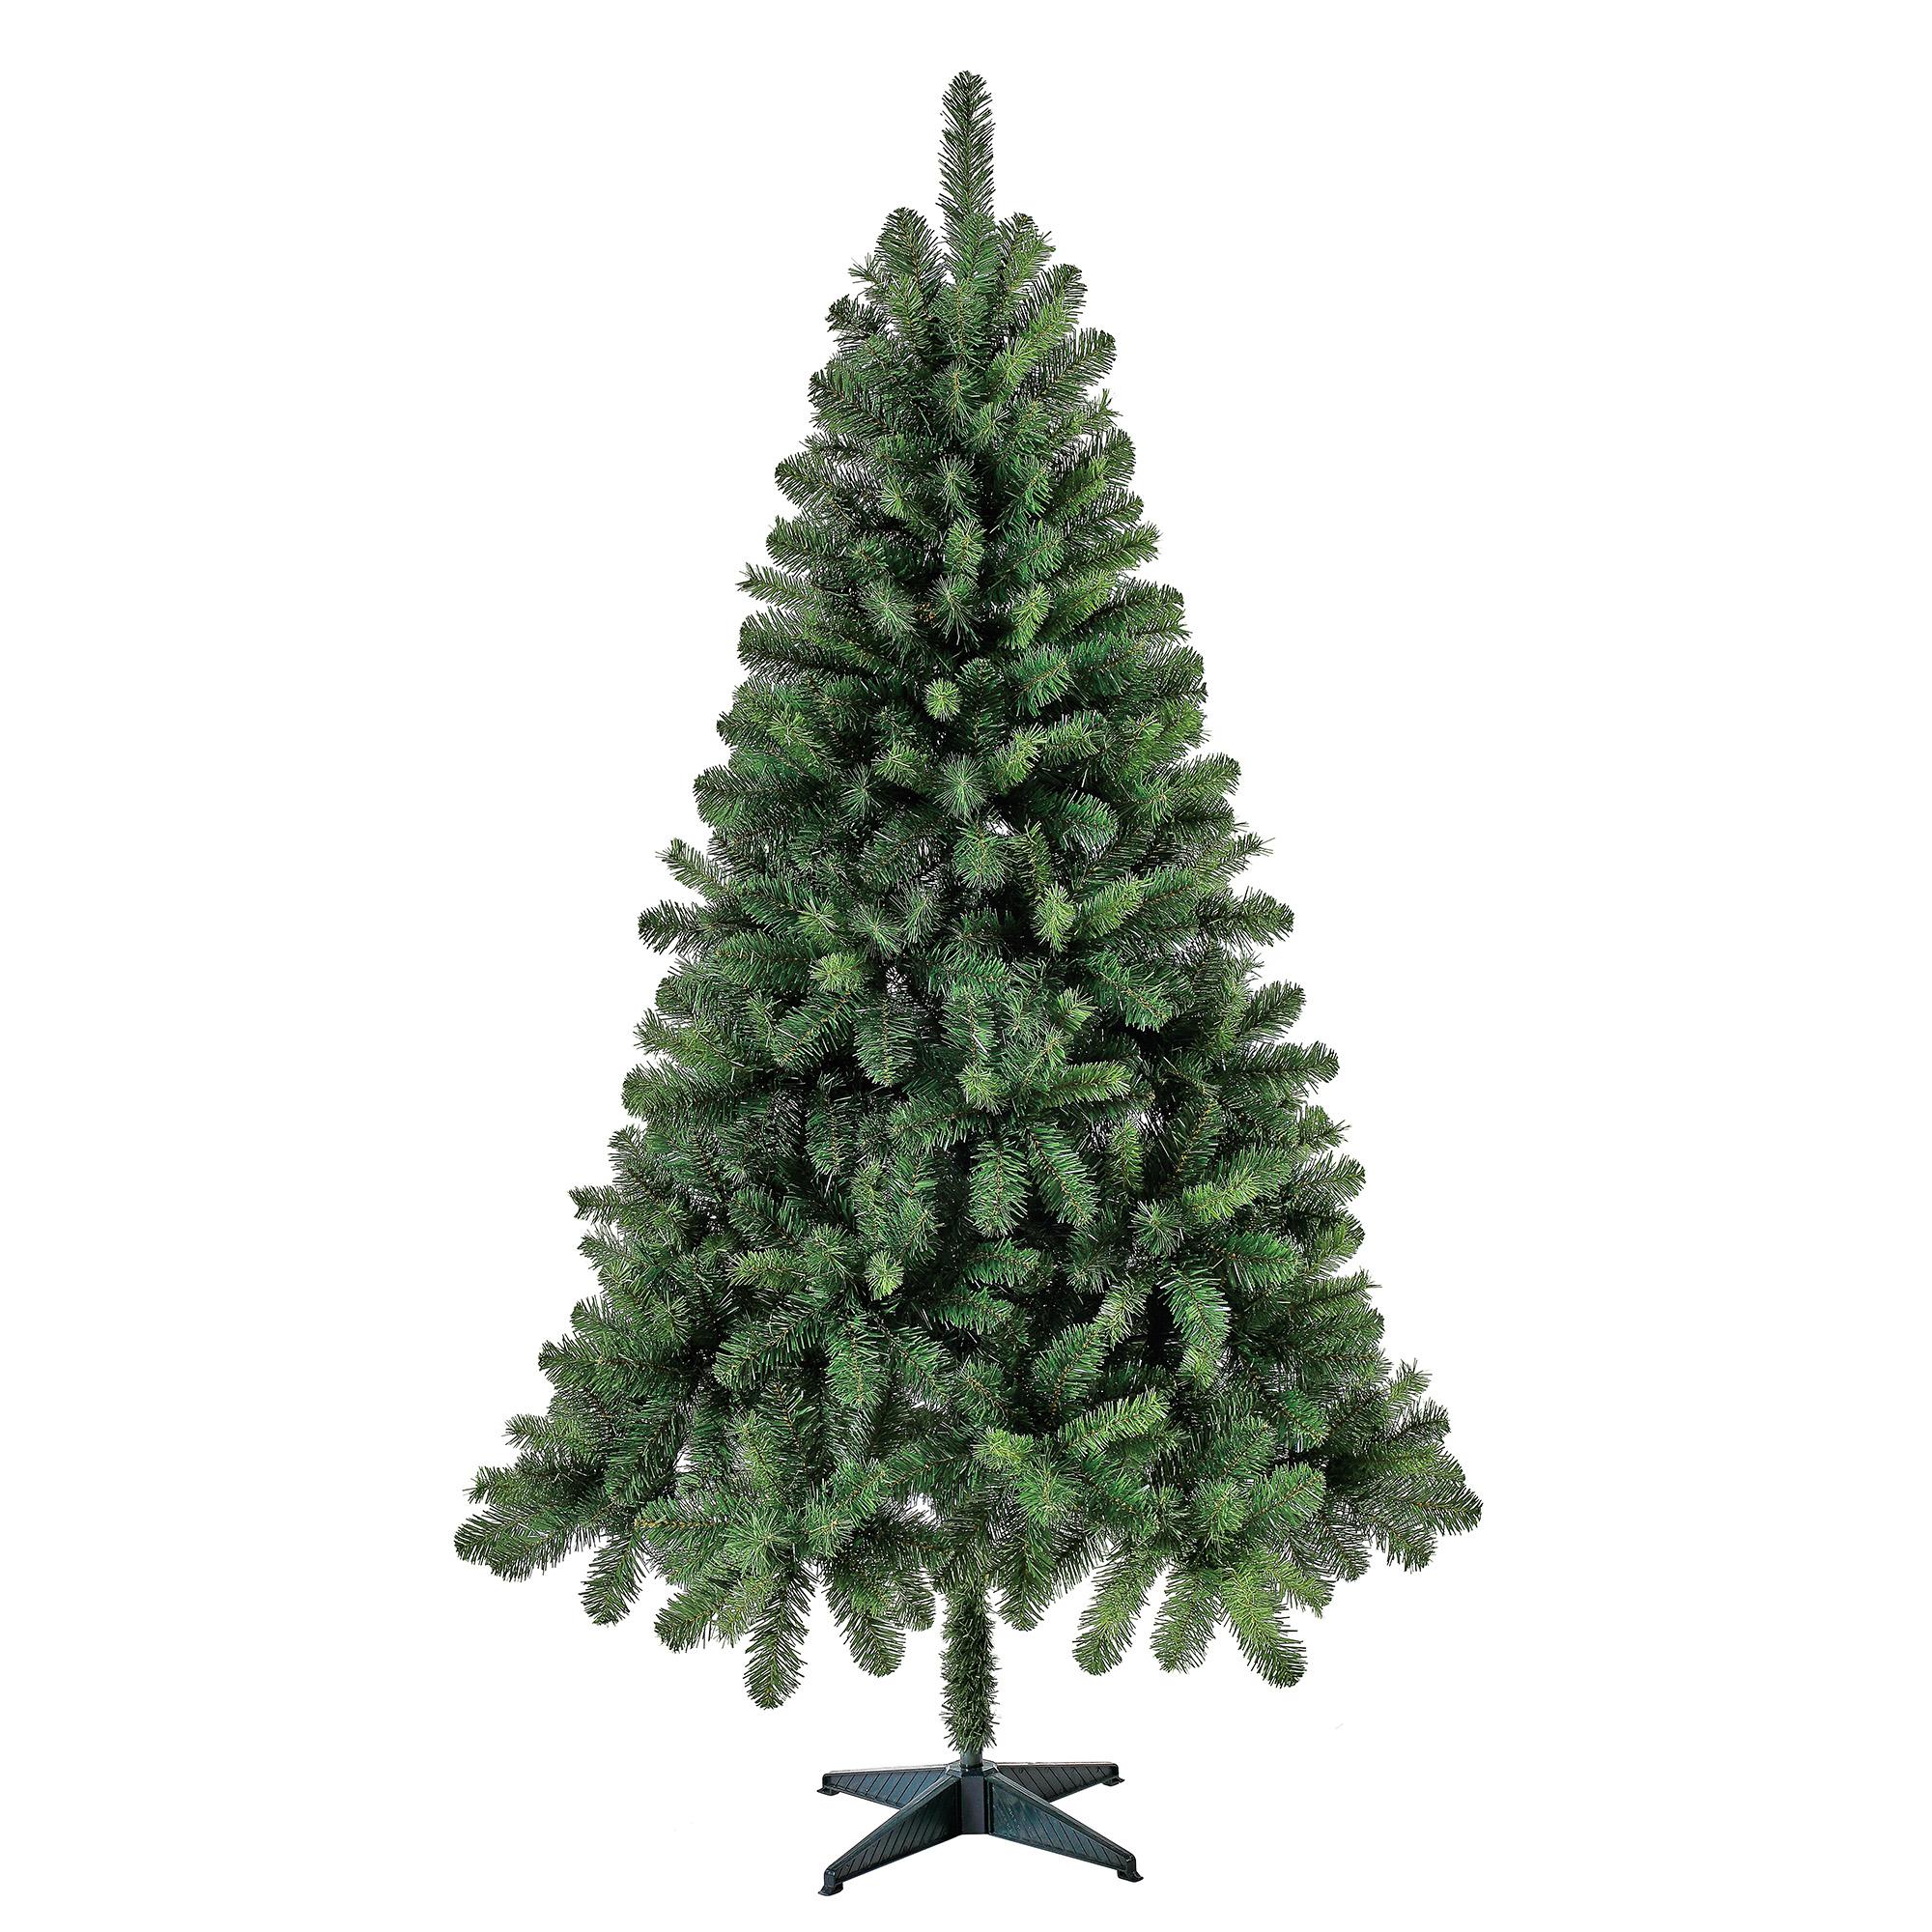 Holiday Incandescent Blue Jackson Spruce Artificial Christmas Tree for $20